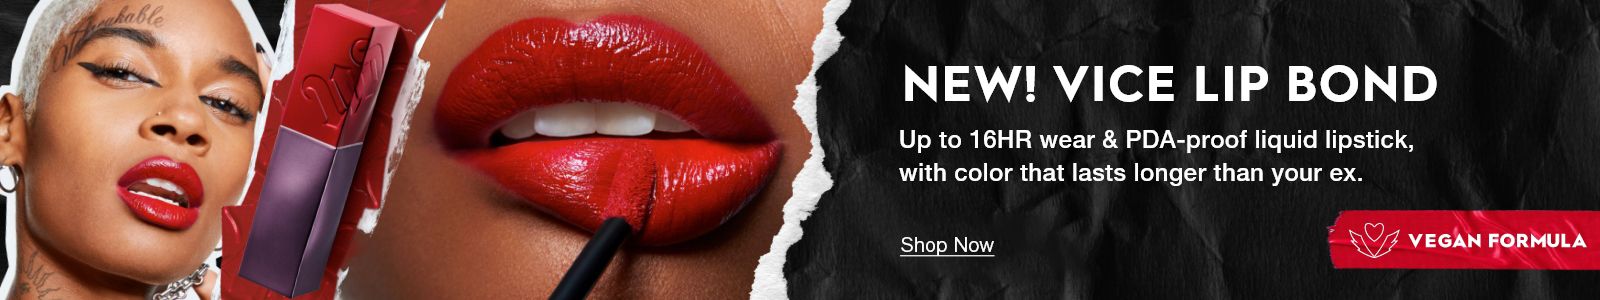 Vegan Formula, New! Vice lip bond, Up to 16HR wear and PDA-proof liquid lipstick, with color that lasts longer than your ex